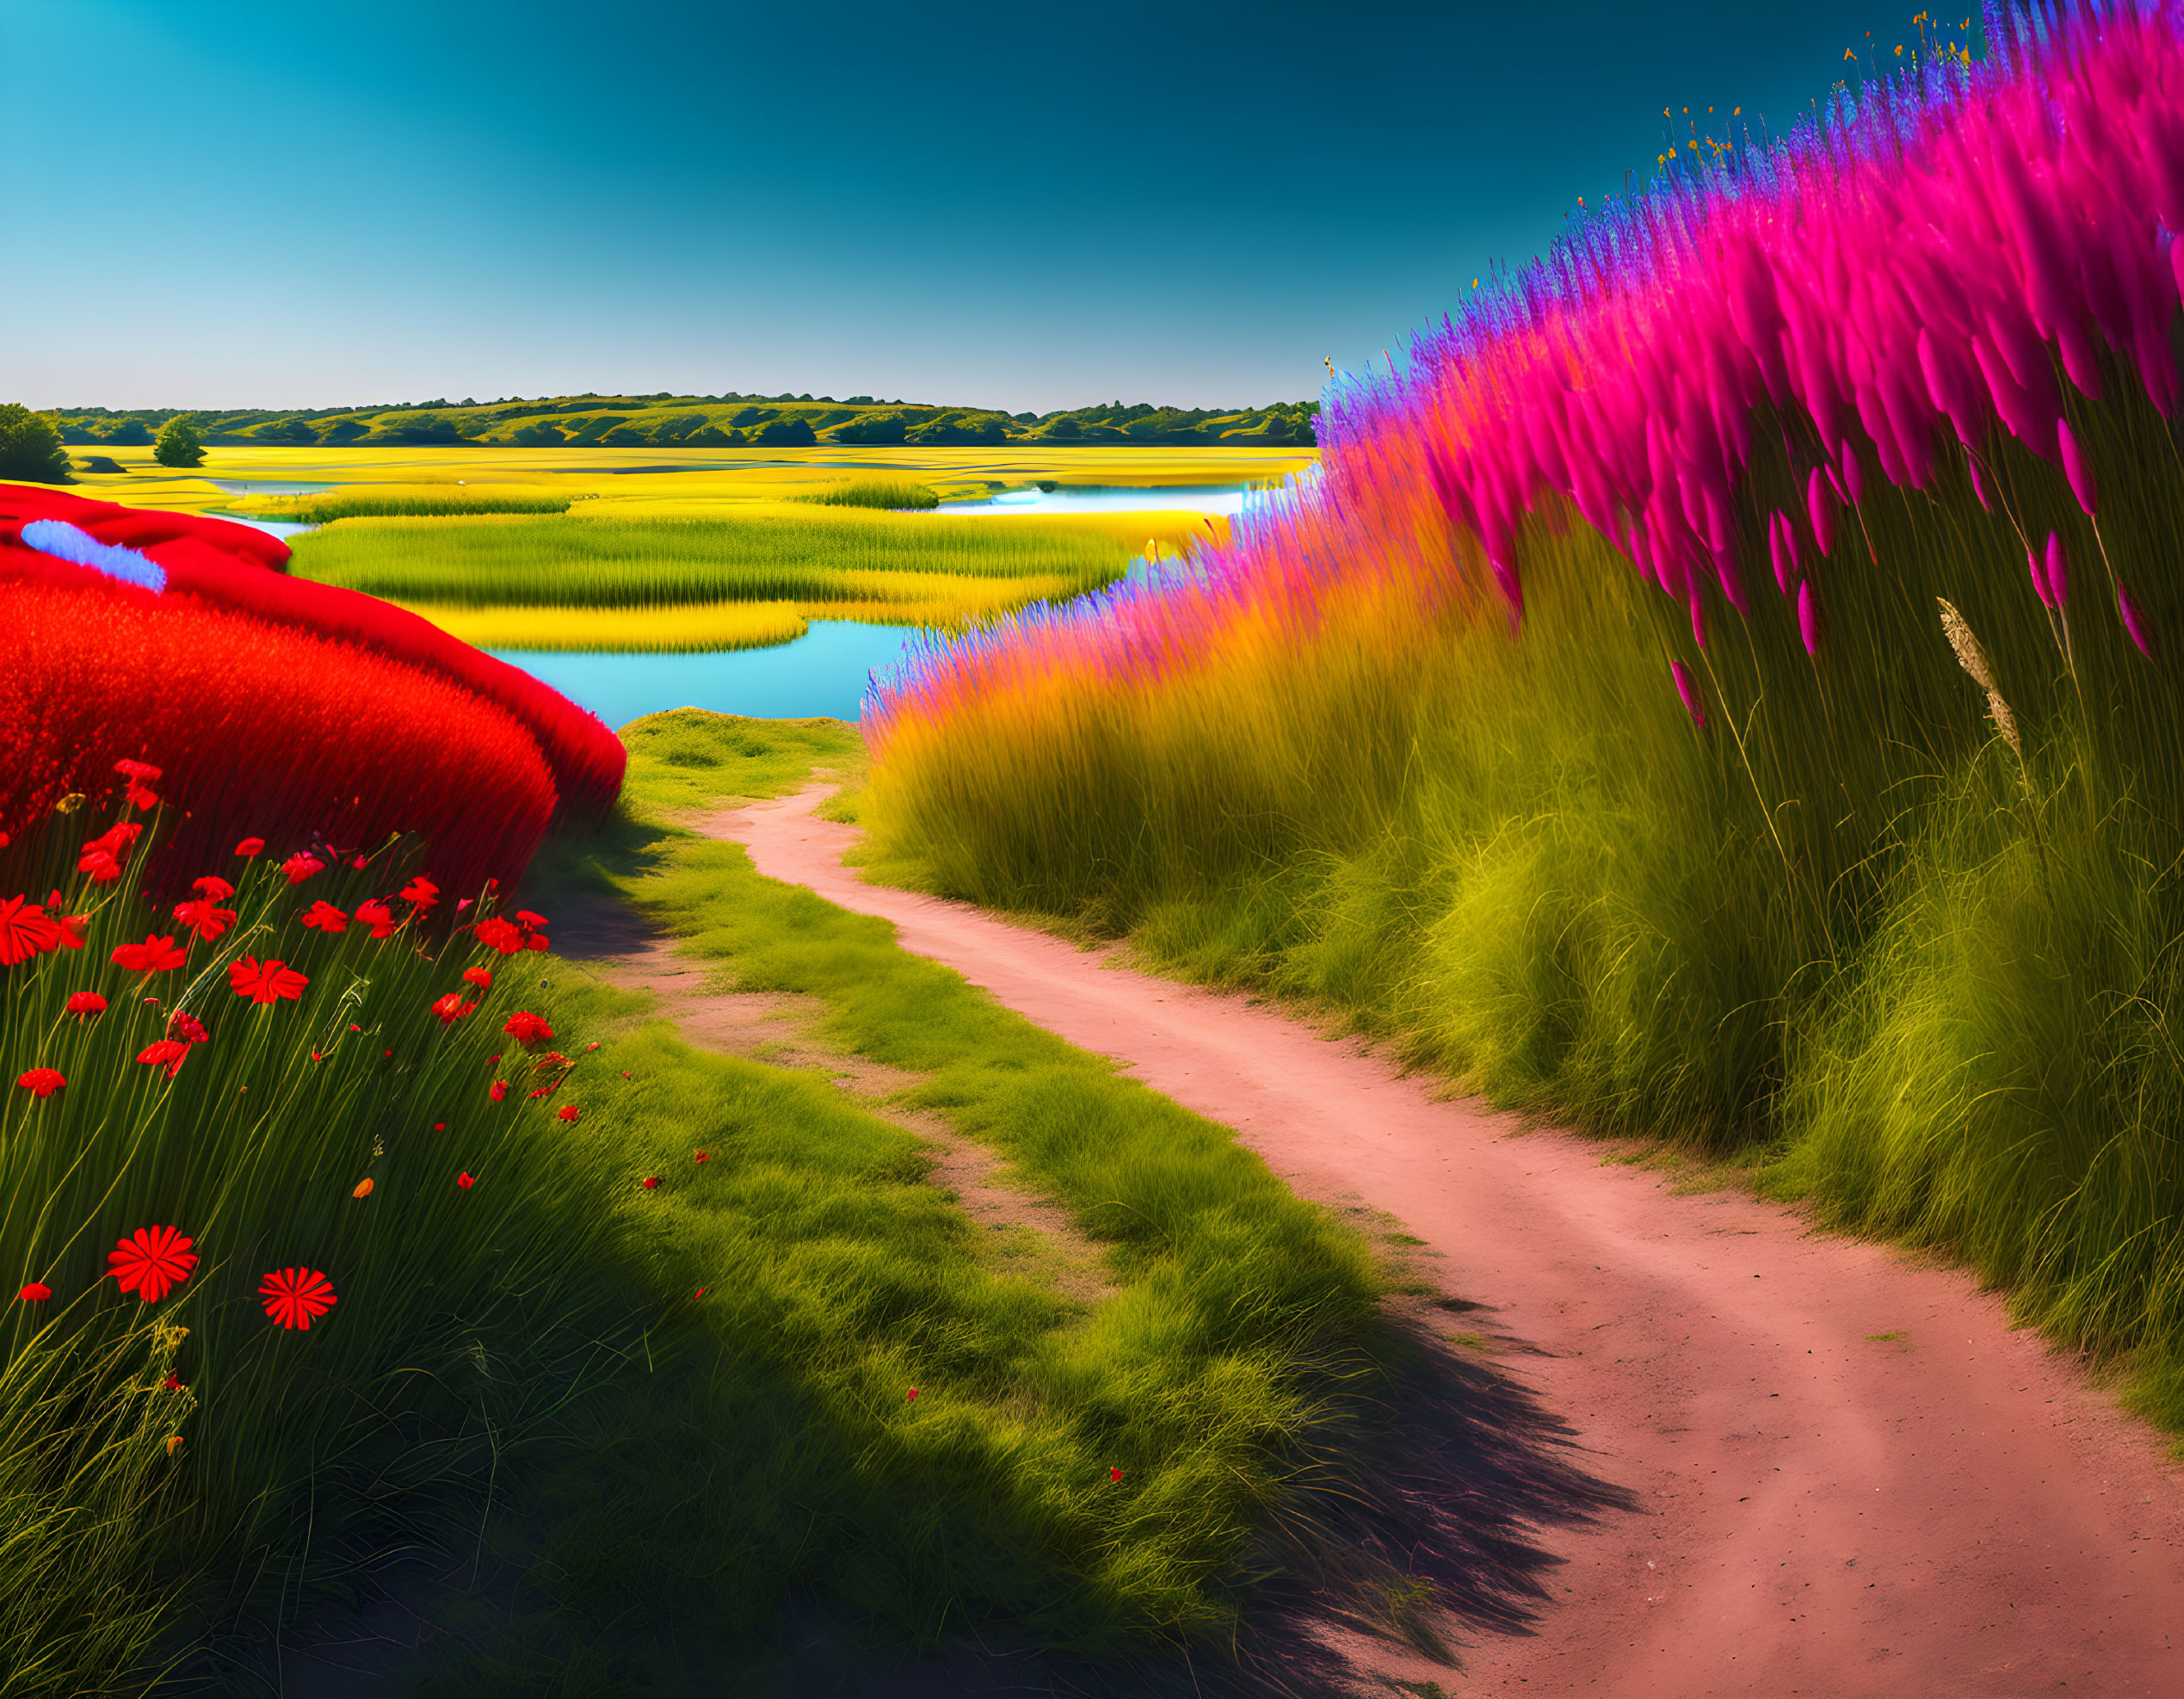 Colorful landscape with dirt path, red poppies, pink grasses, blue water, and green